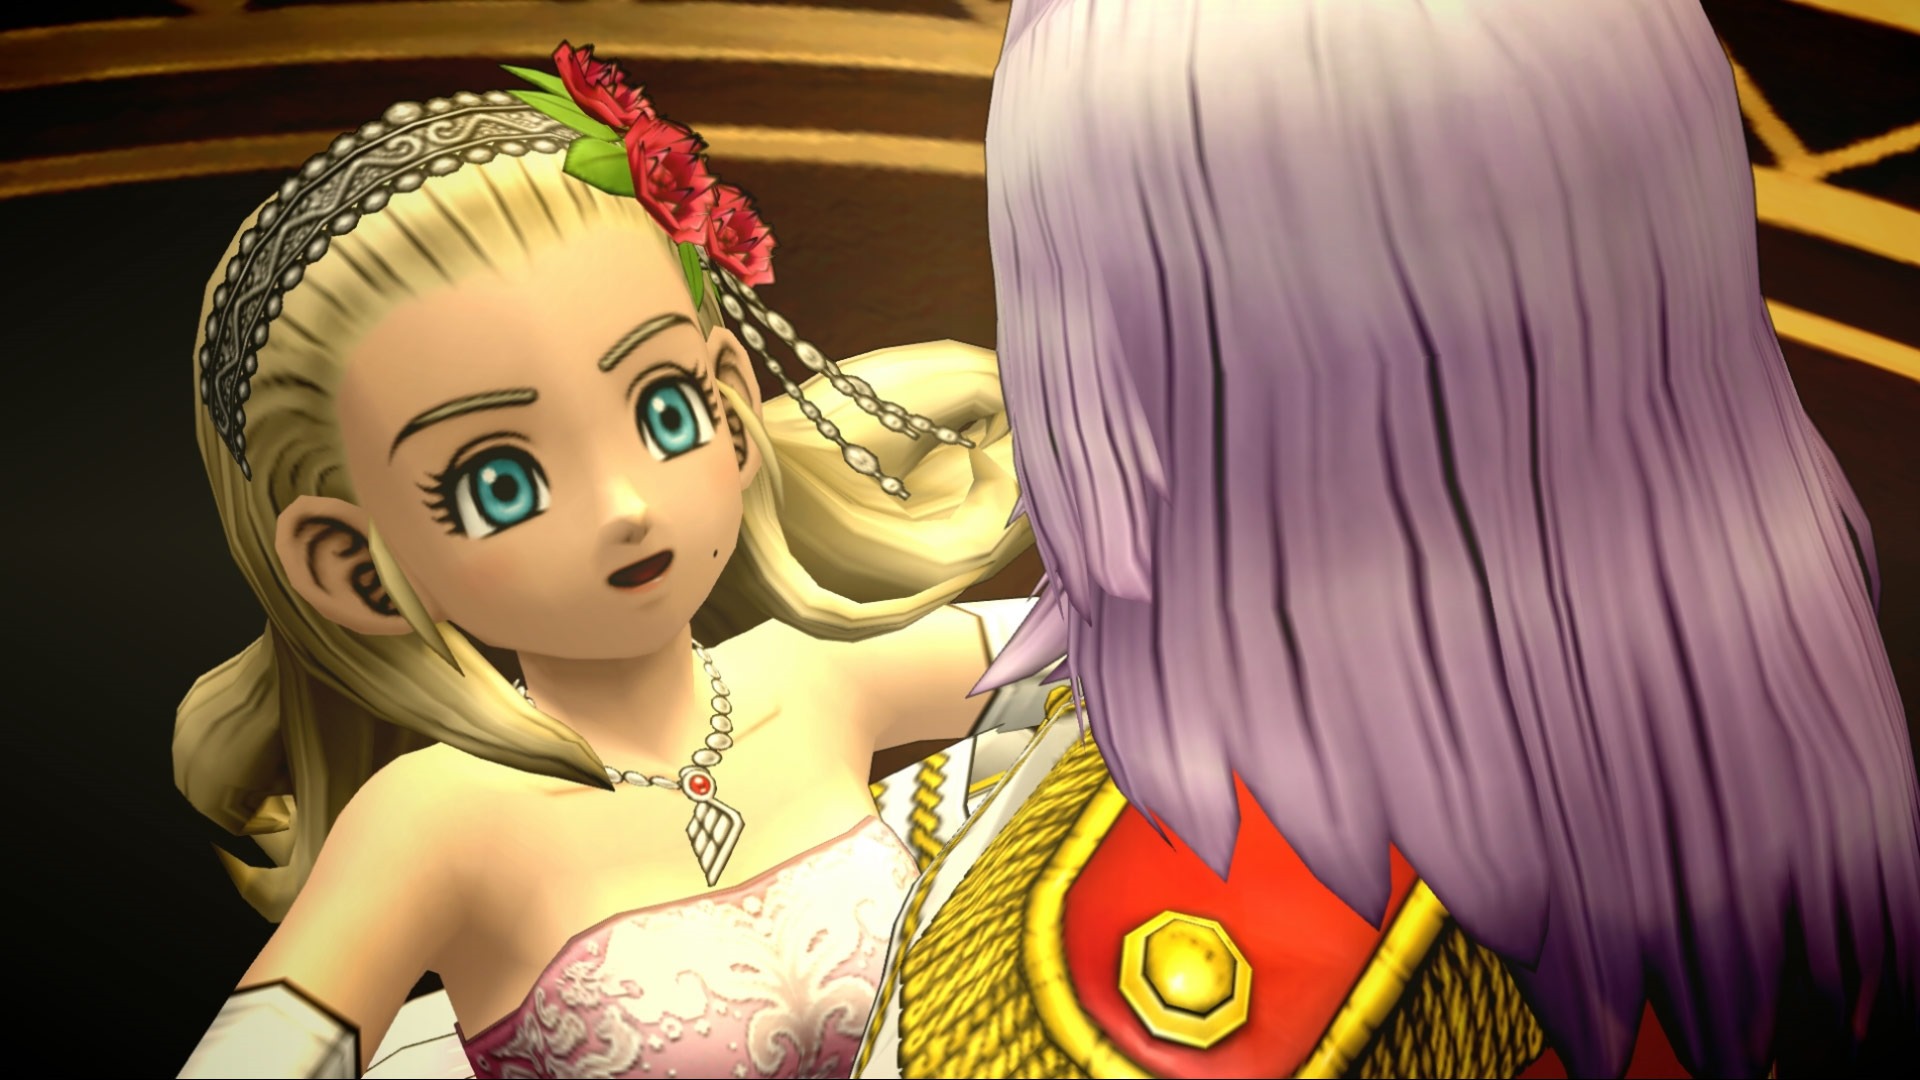 Dragon Quest X Launches on PS4 on August 17, on Switch on September 21 in  Japan - News - Anime News Network